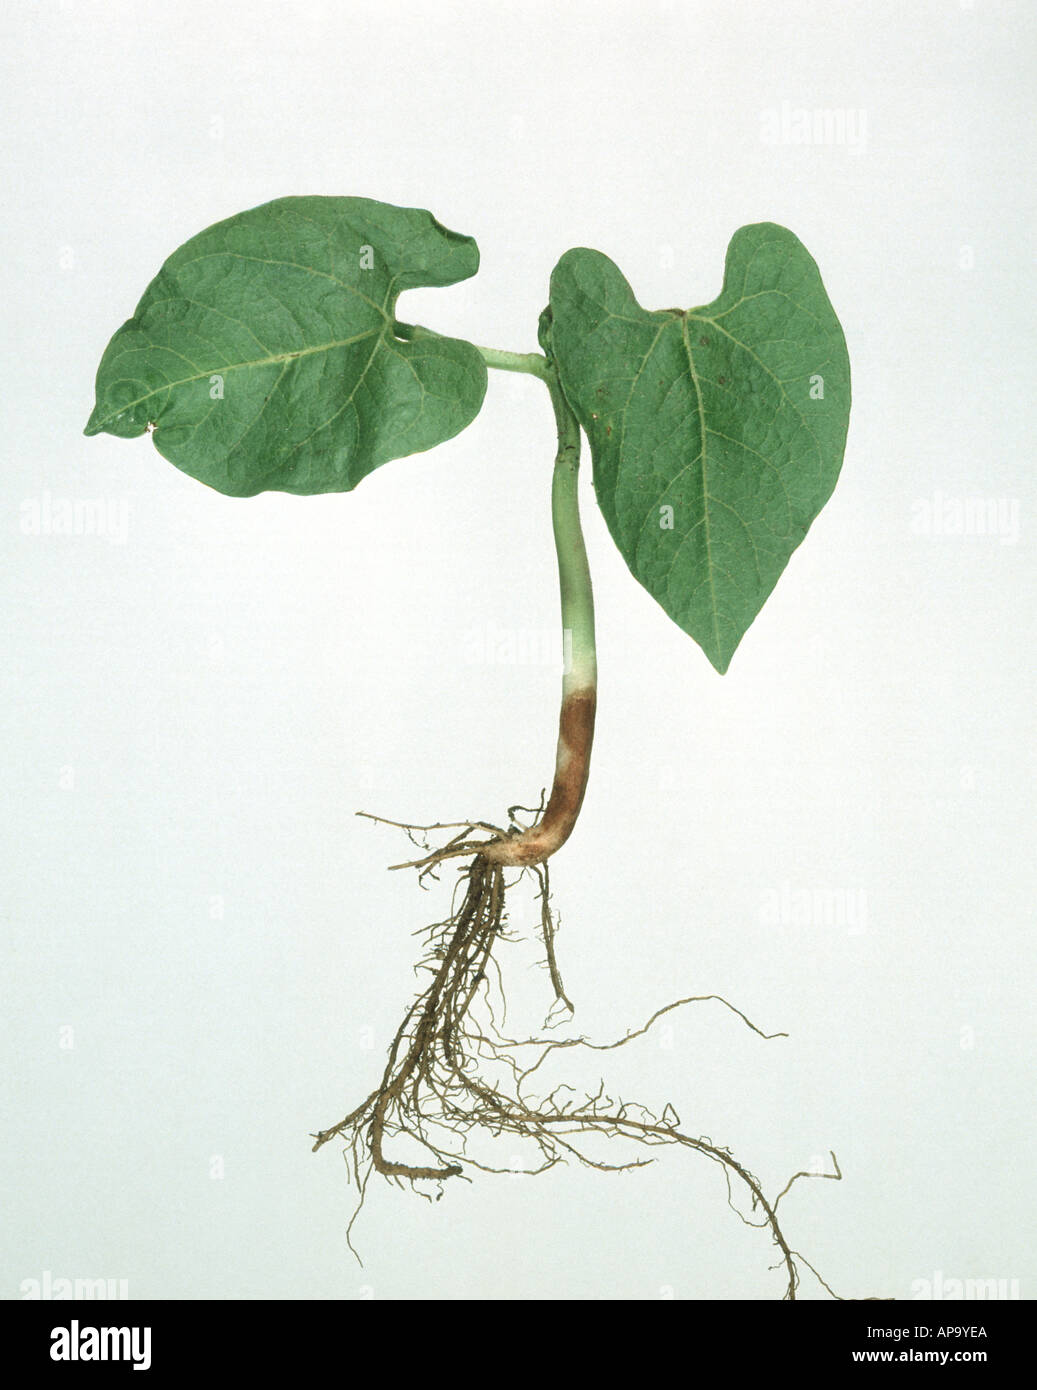 Stem rot Rhizoctonia solani damage to the base of a green bean seedling Stock Photo